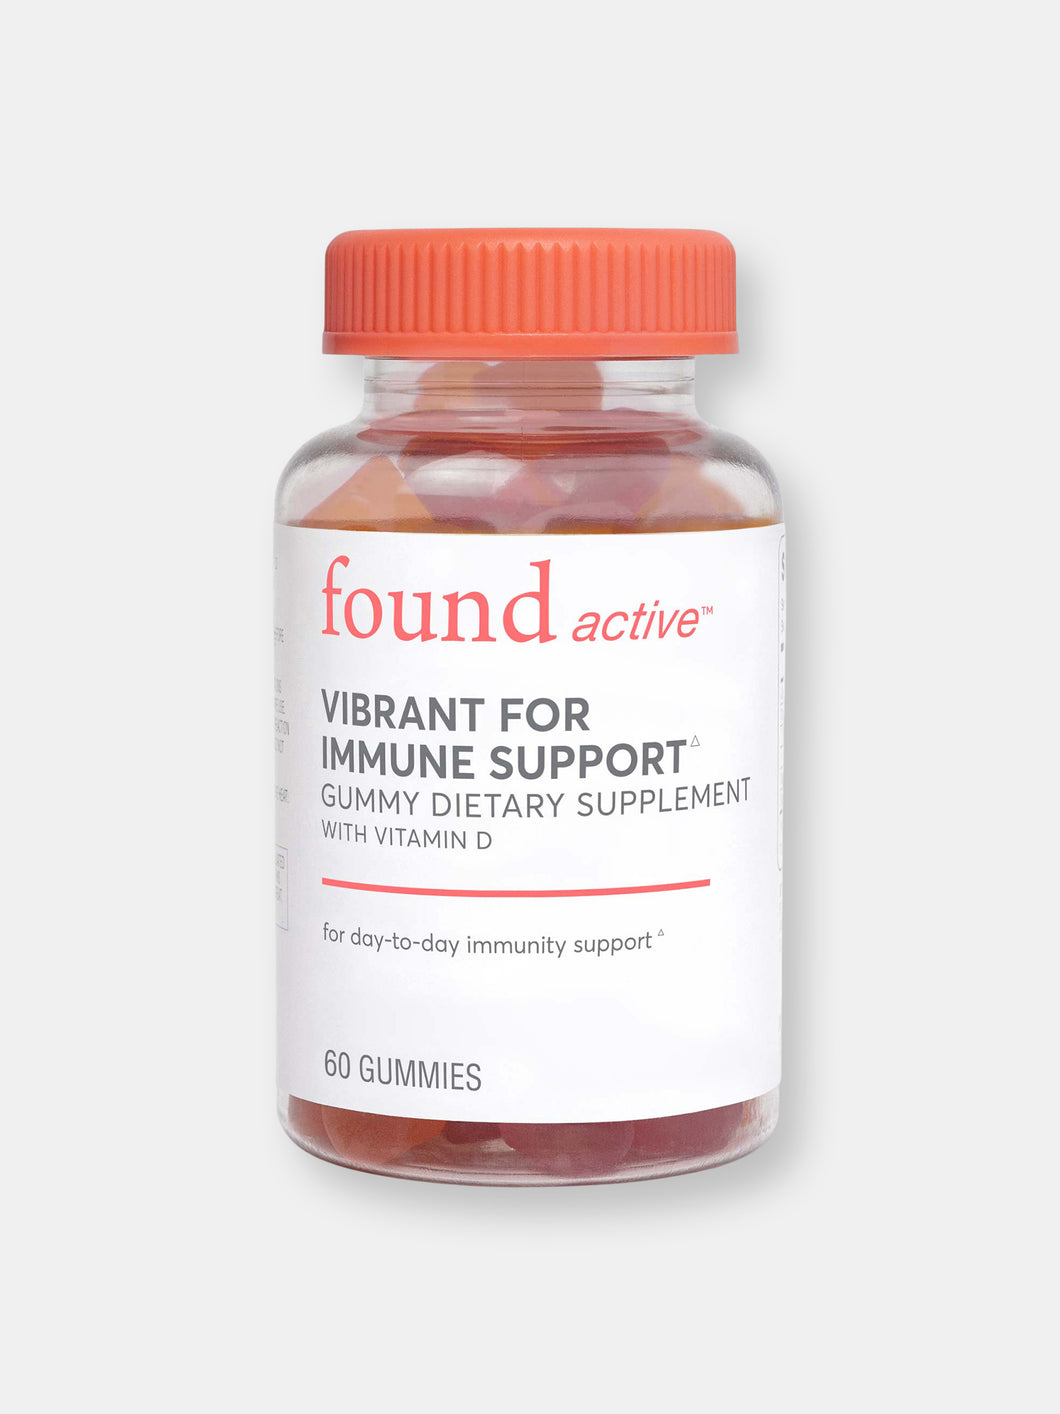 Vibrant for Immune Support Gummy Dietary Supplement with Vitamin D